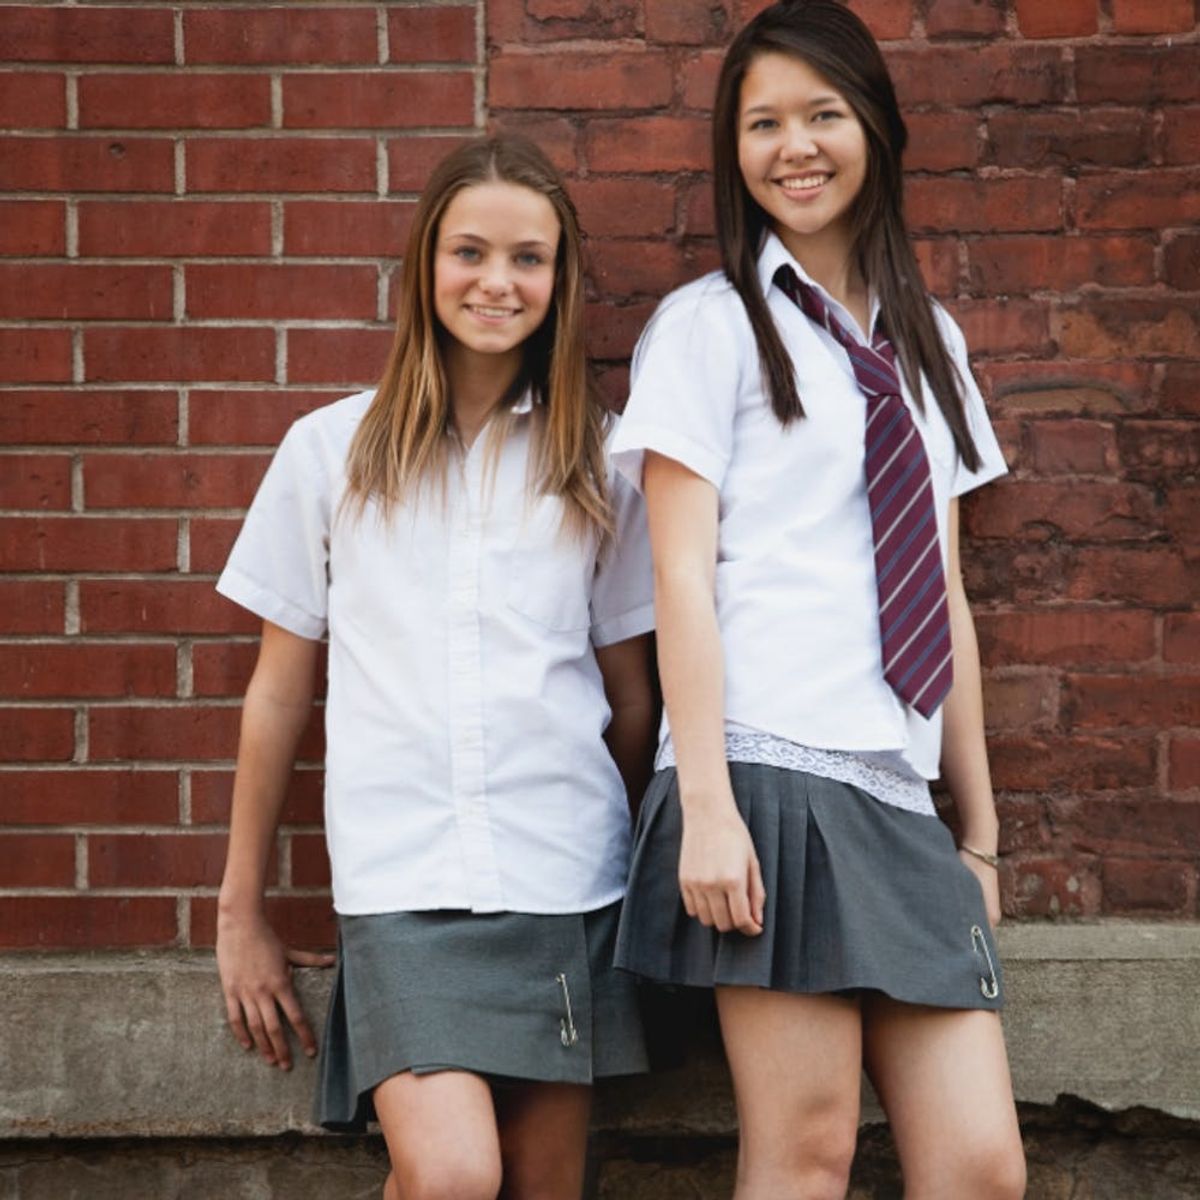 These Girls Staged the Chillest Protest EVER to Change Their School’s Decades-Old Dress Code